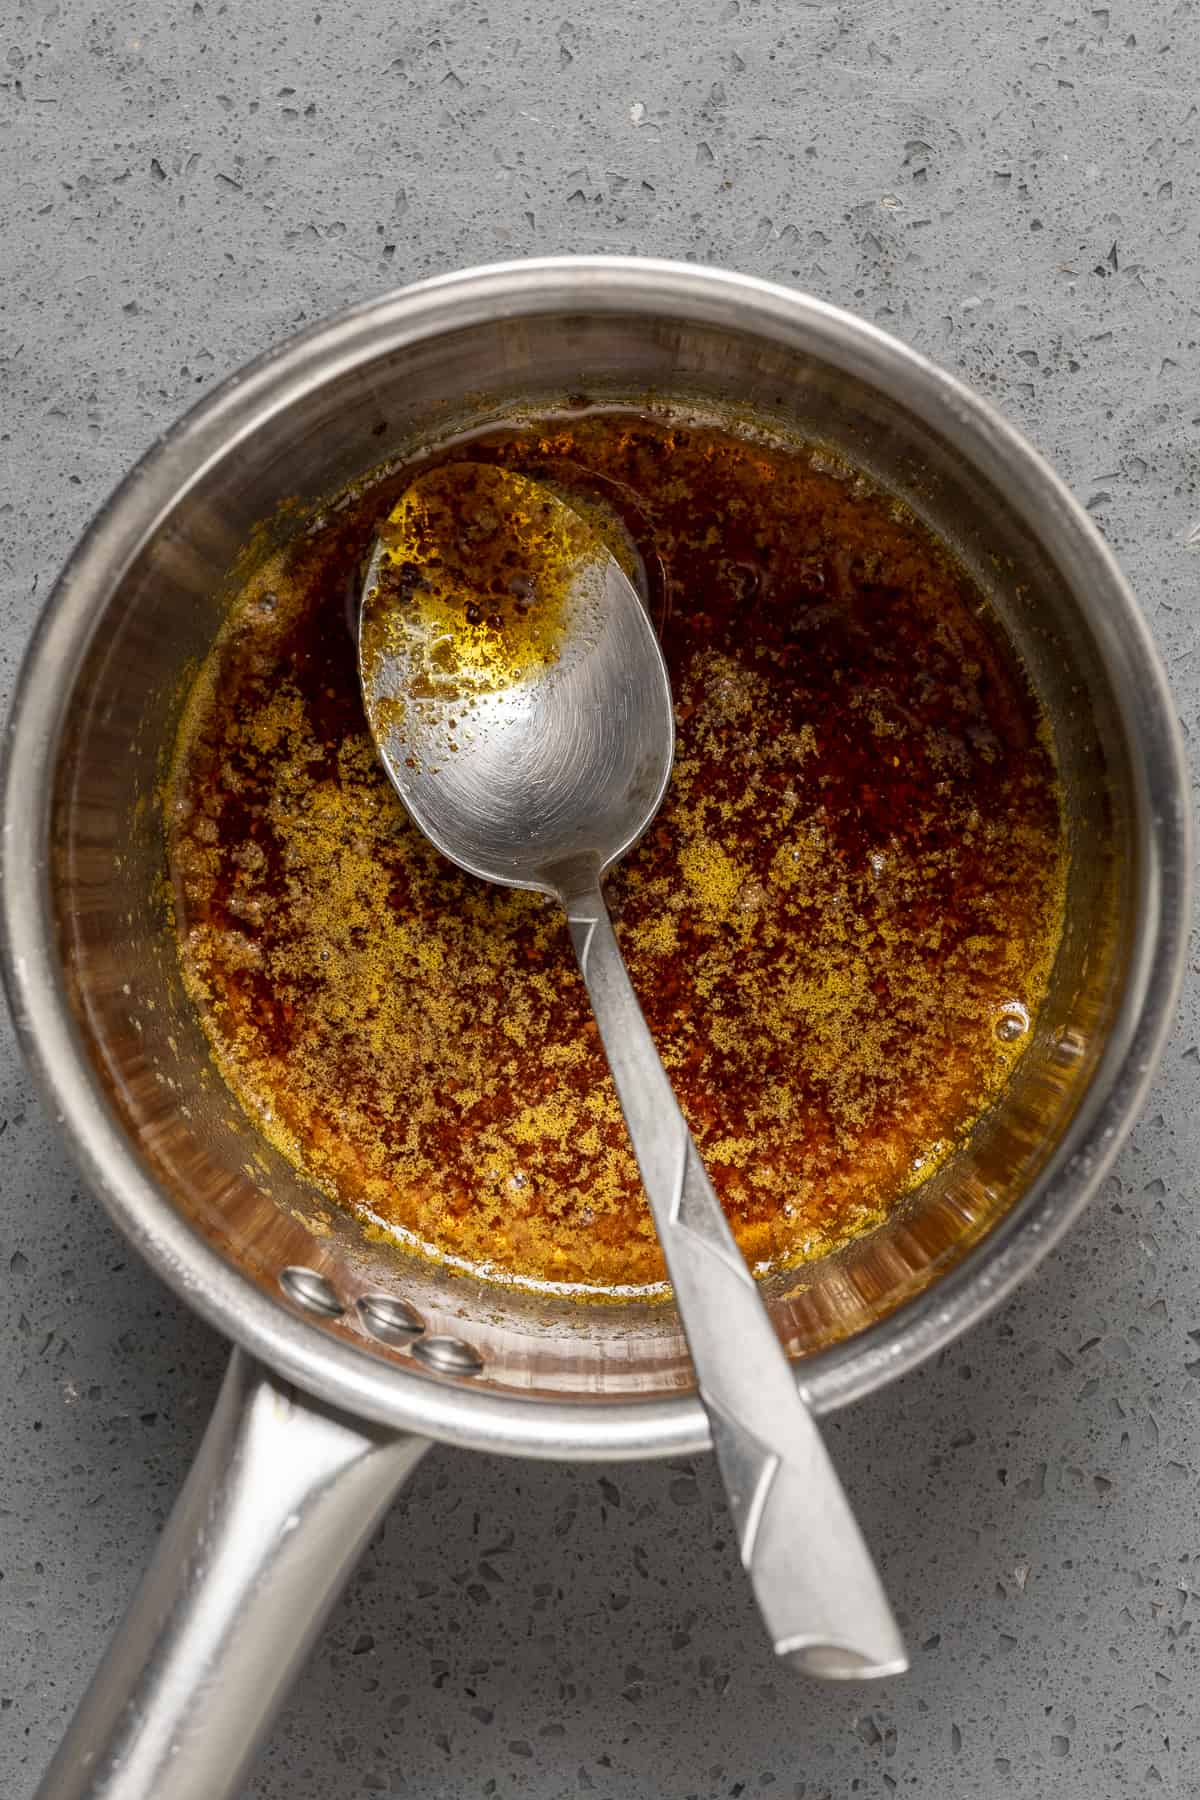 Spiced butter sauce in a small saucepan and a spoon inside it.